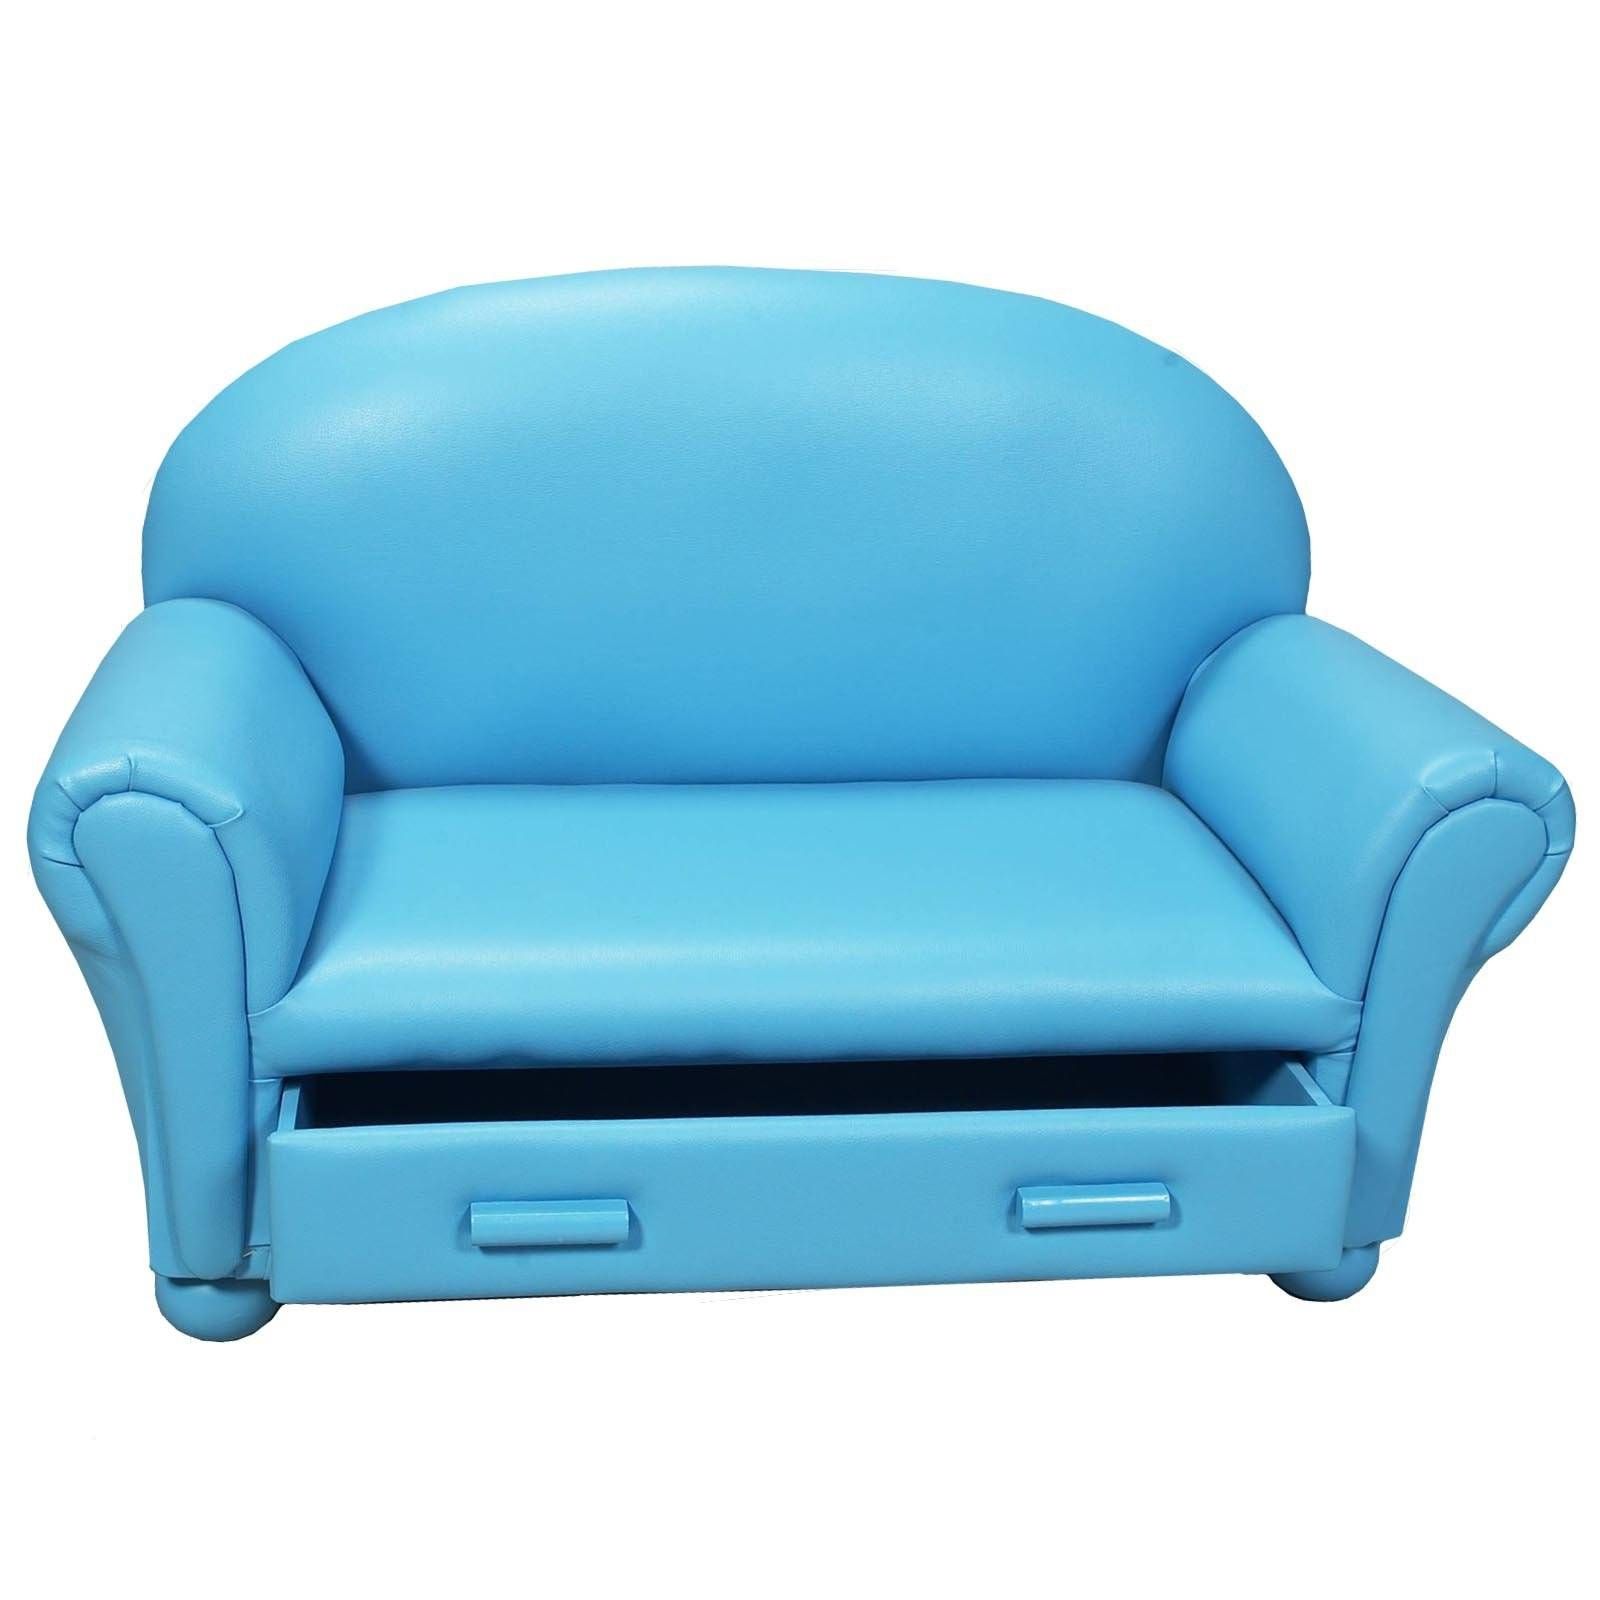 Childrens Sofa With Storage Drawer | Hayneedle In Childrens Sofa Chairs (View 12 of 15)